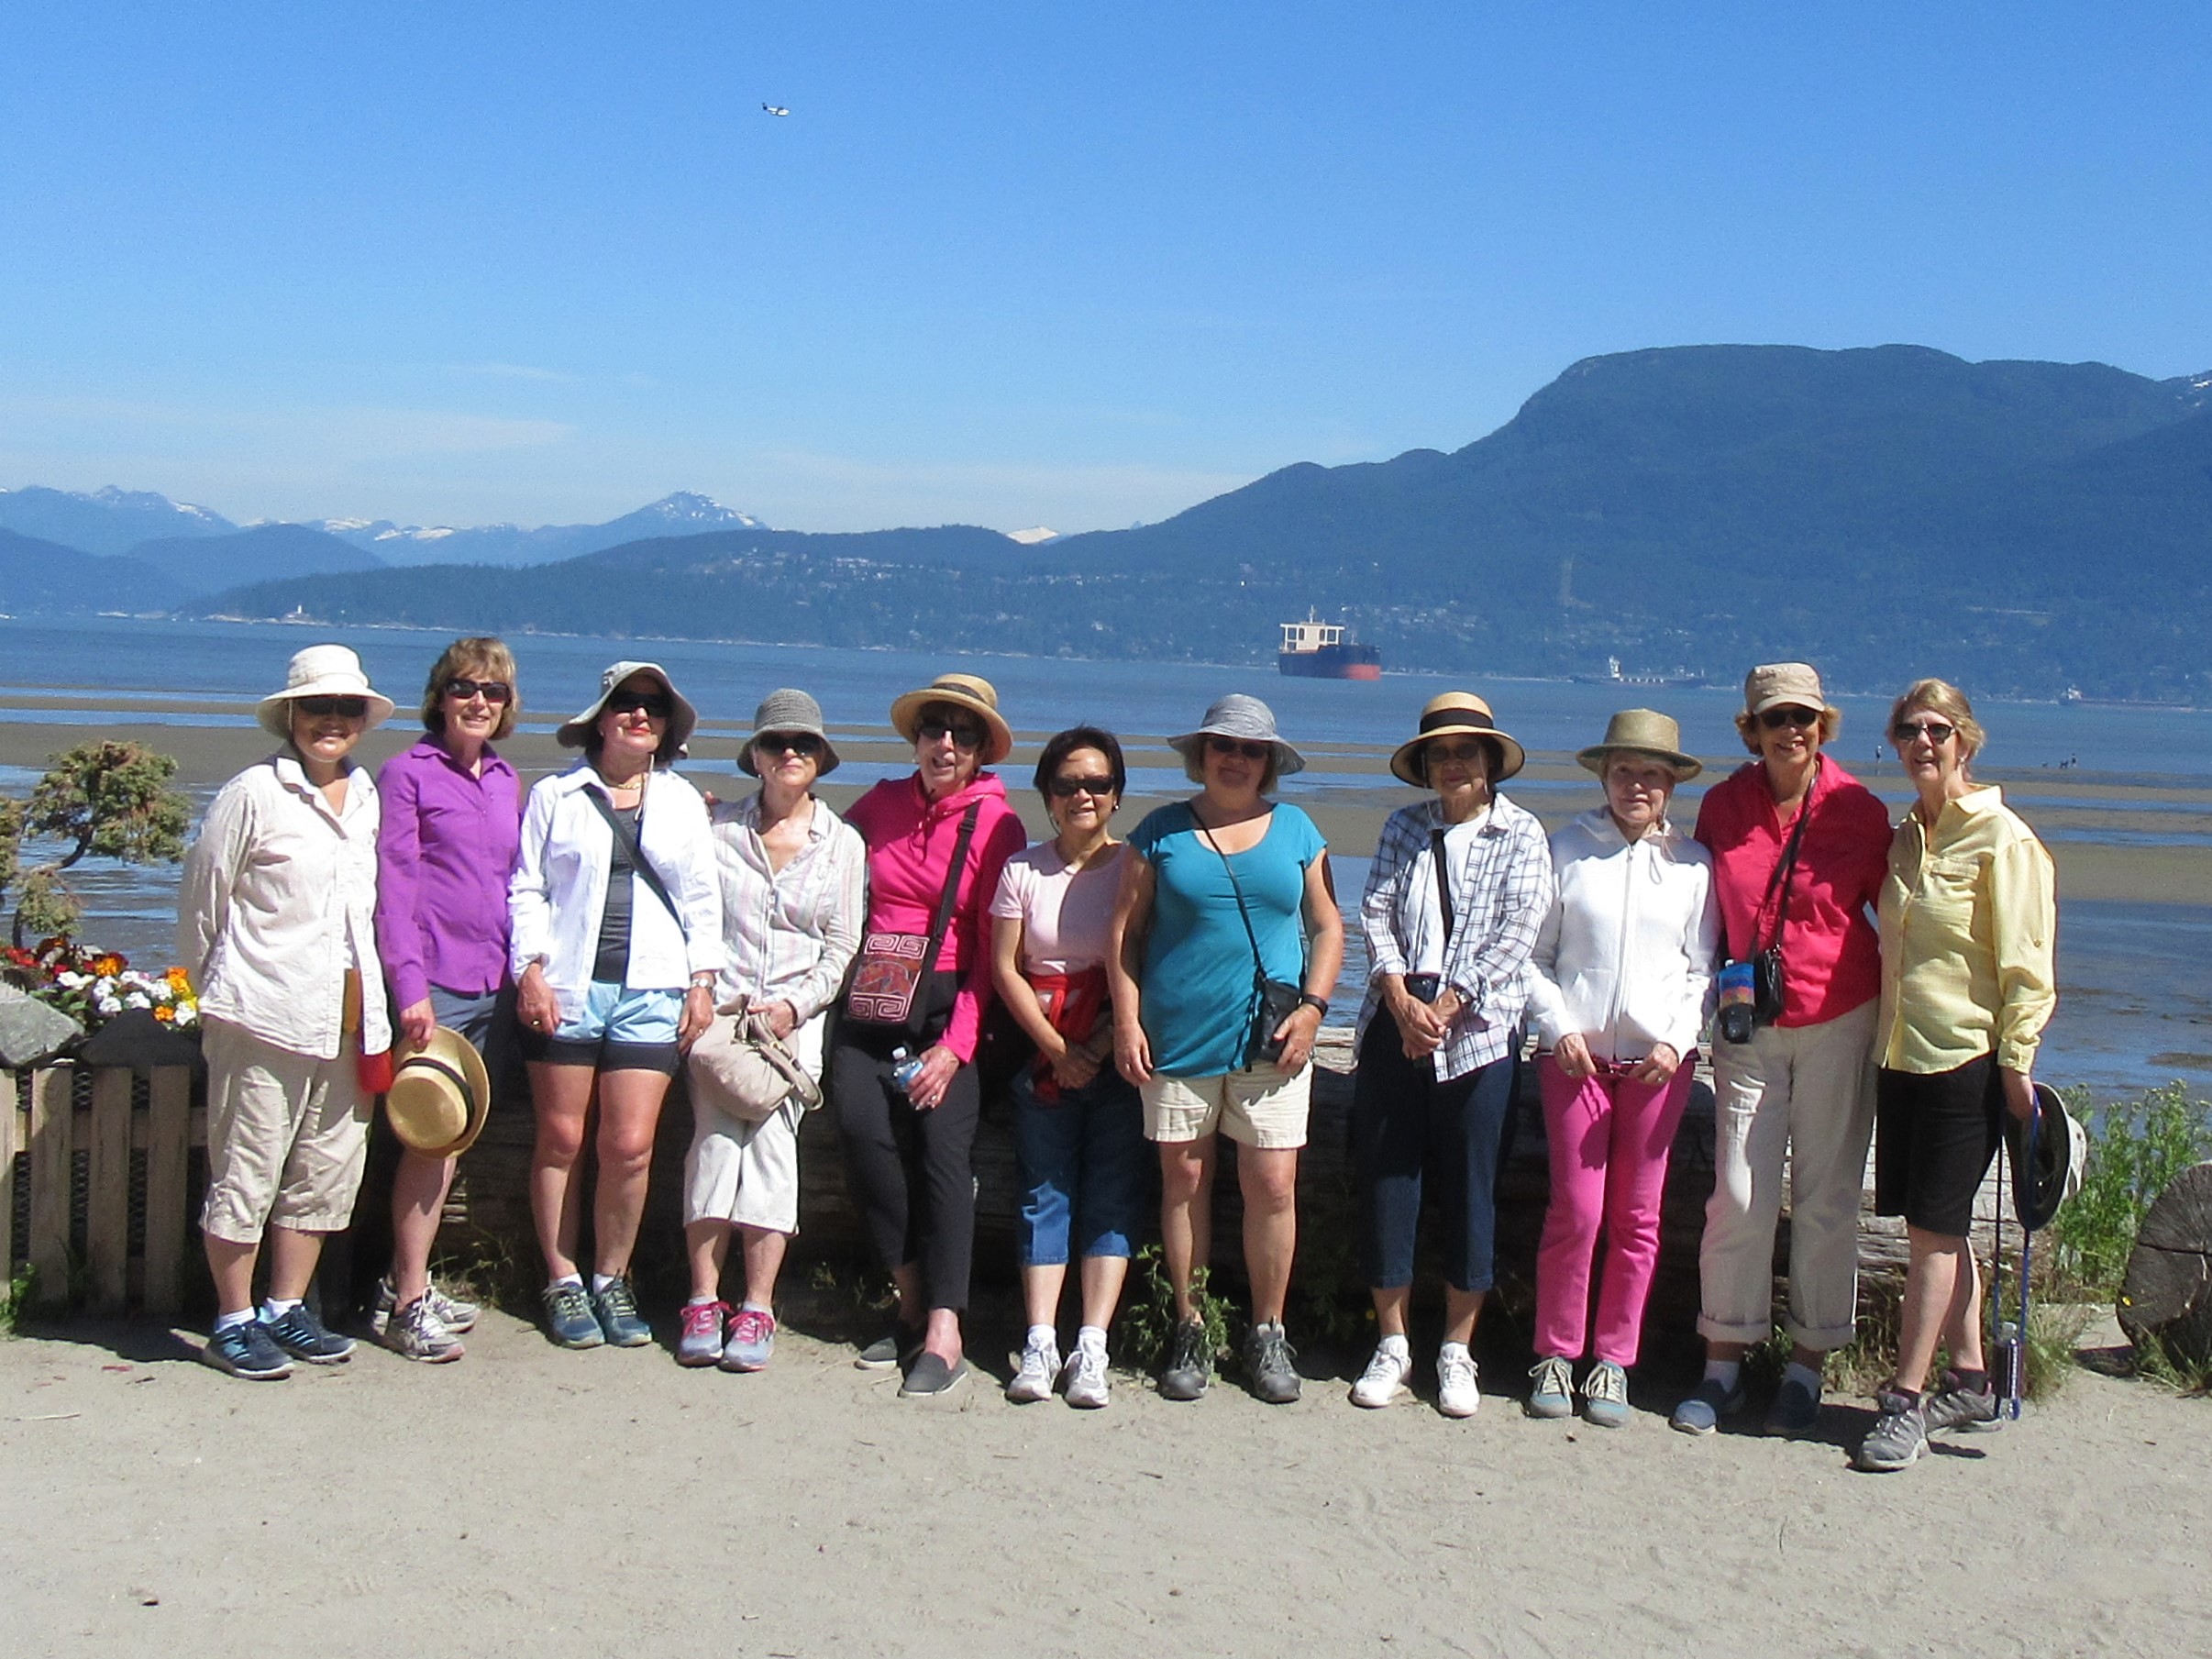 ‘Walkers’ on a sunny July day at Spanish Banks.